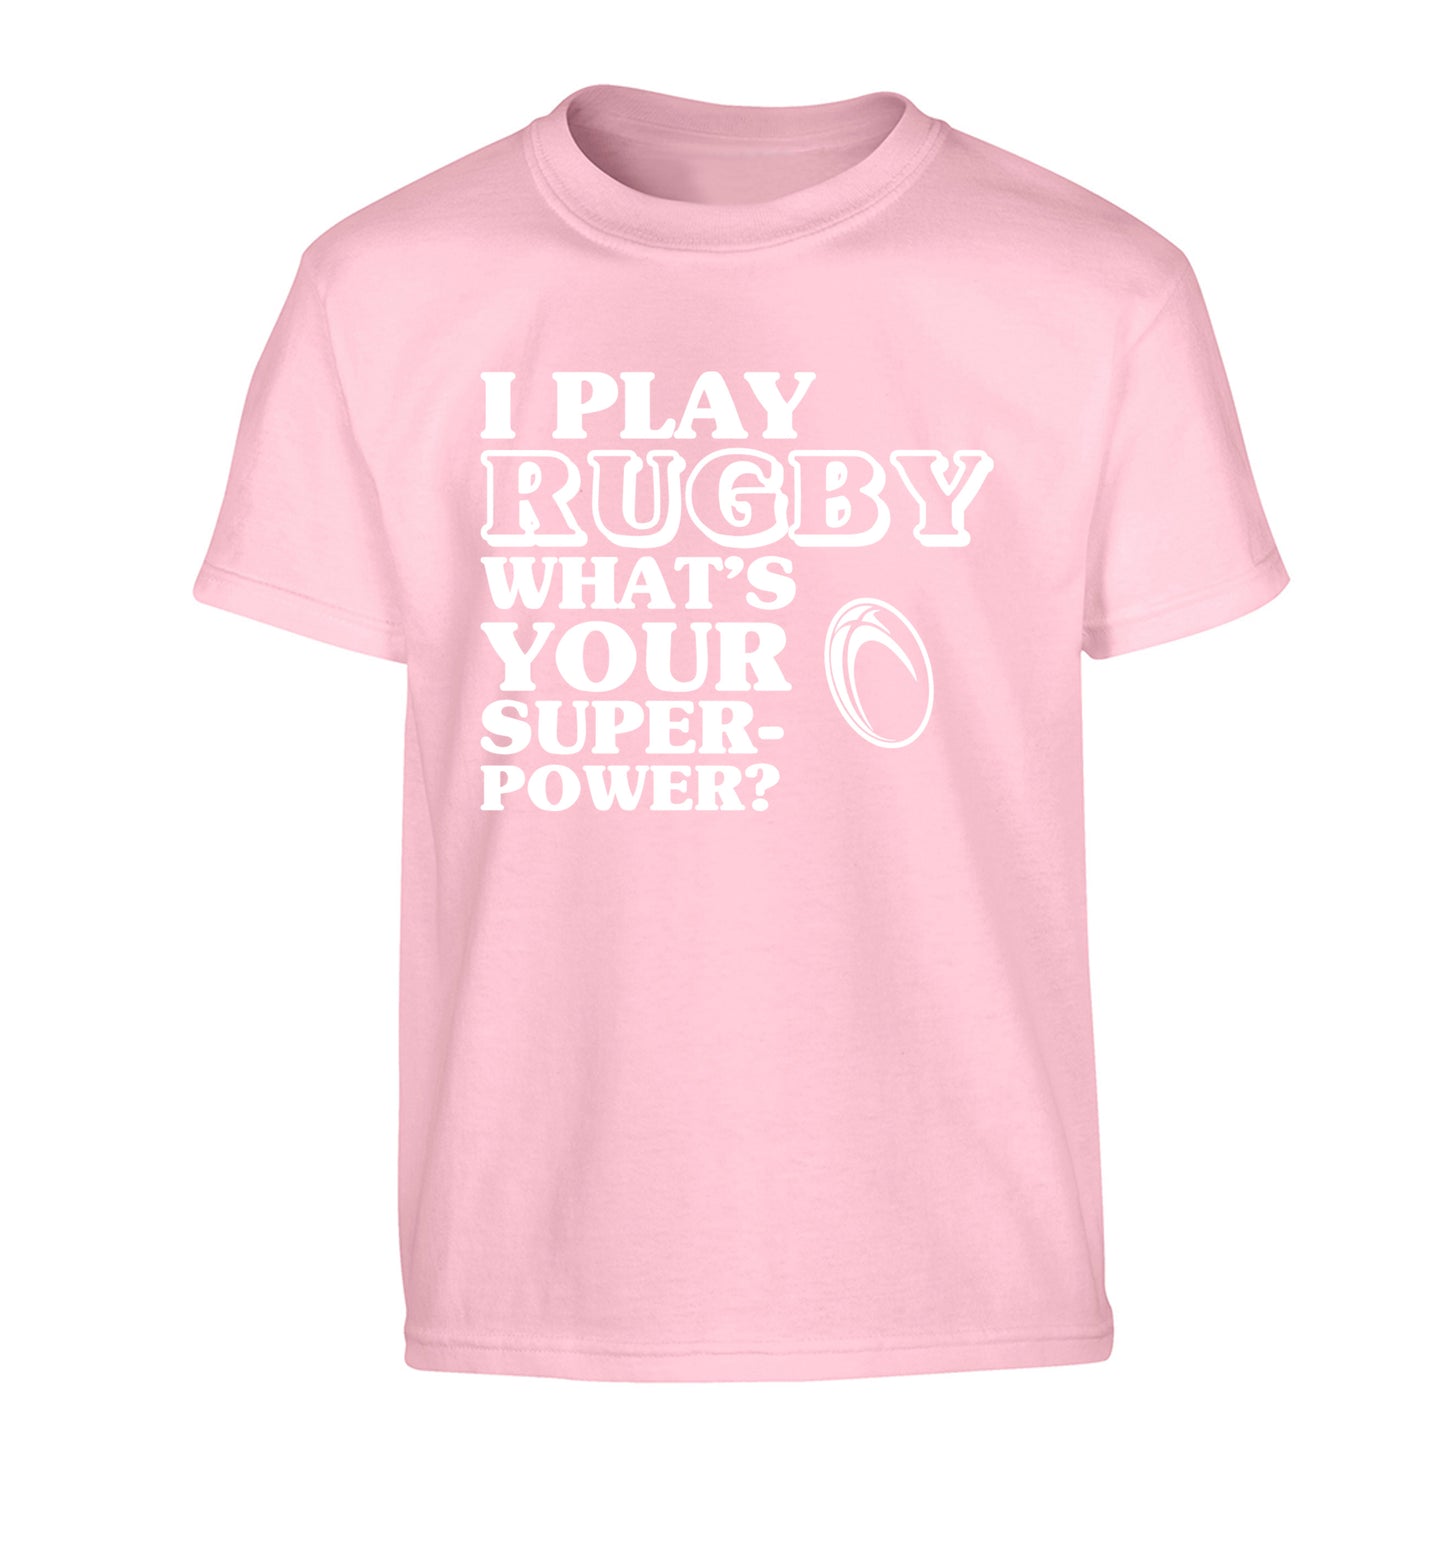 I play rugby what's your superpower? Children's light pink Tshirt 12-13 Years